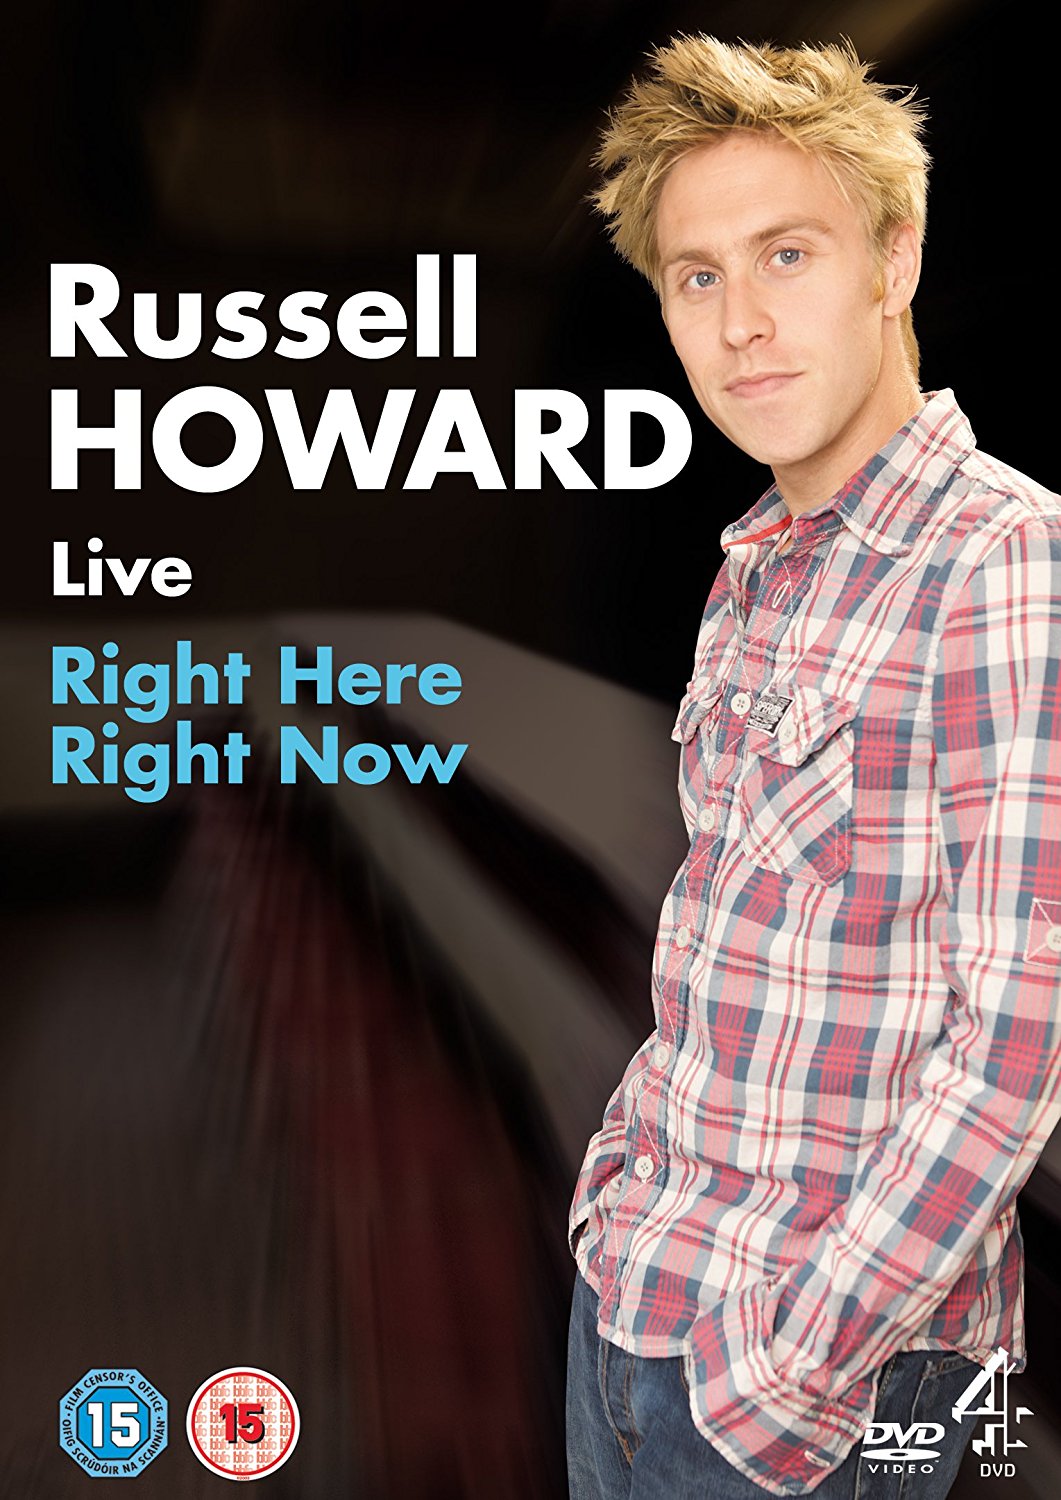 Russell Howard - Right Here Right Now (DVD)